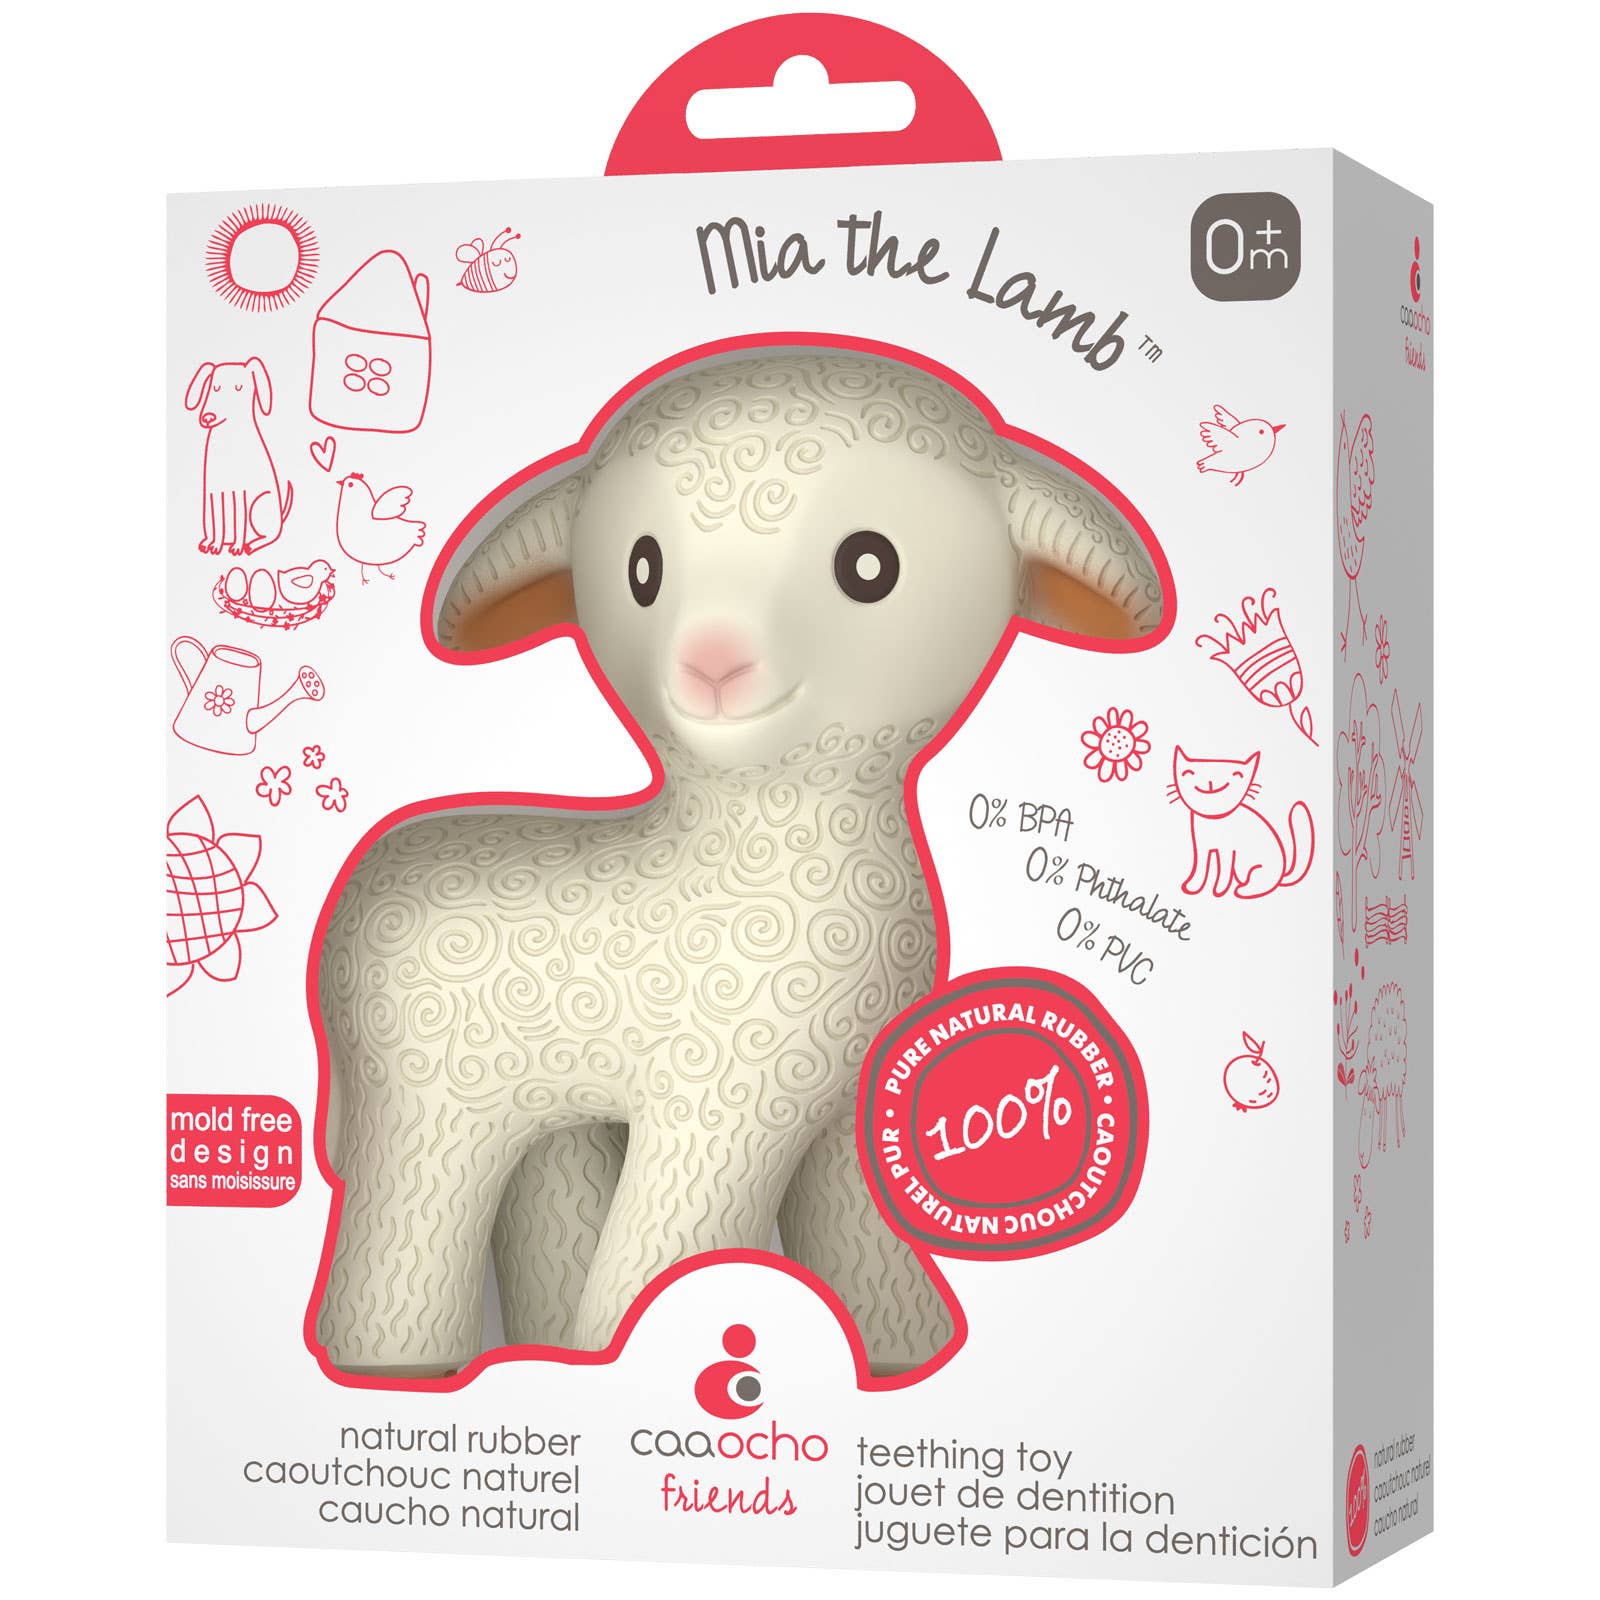 Mia the Lamb Teething Toy - 100% Pure Natural Rubber